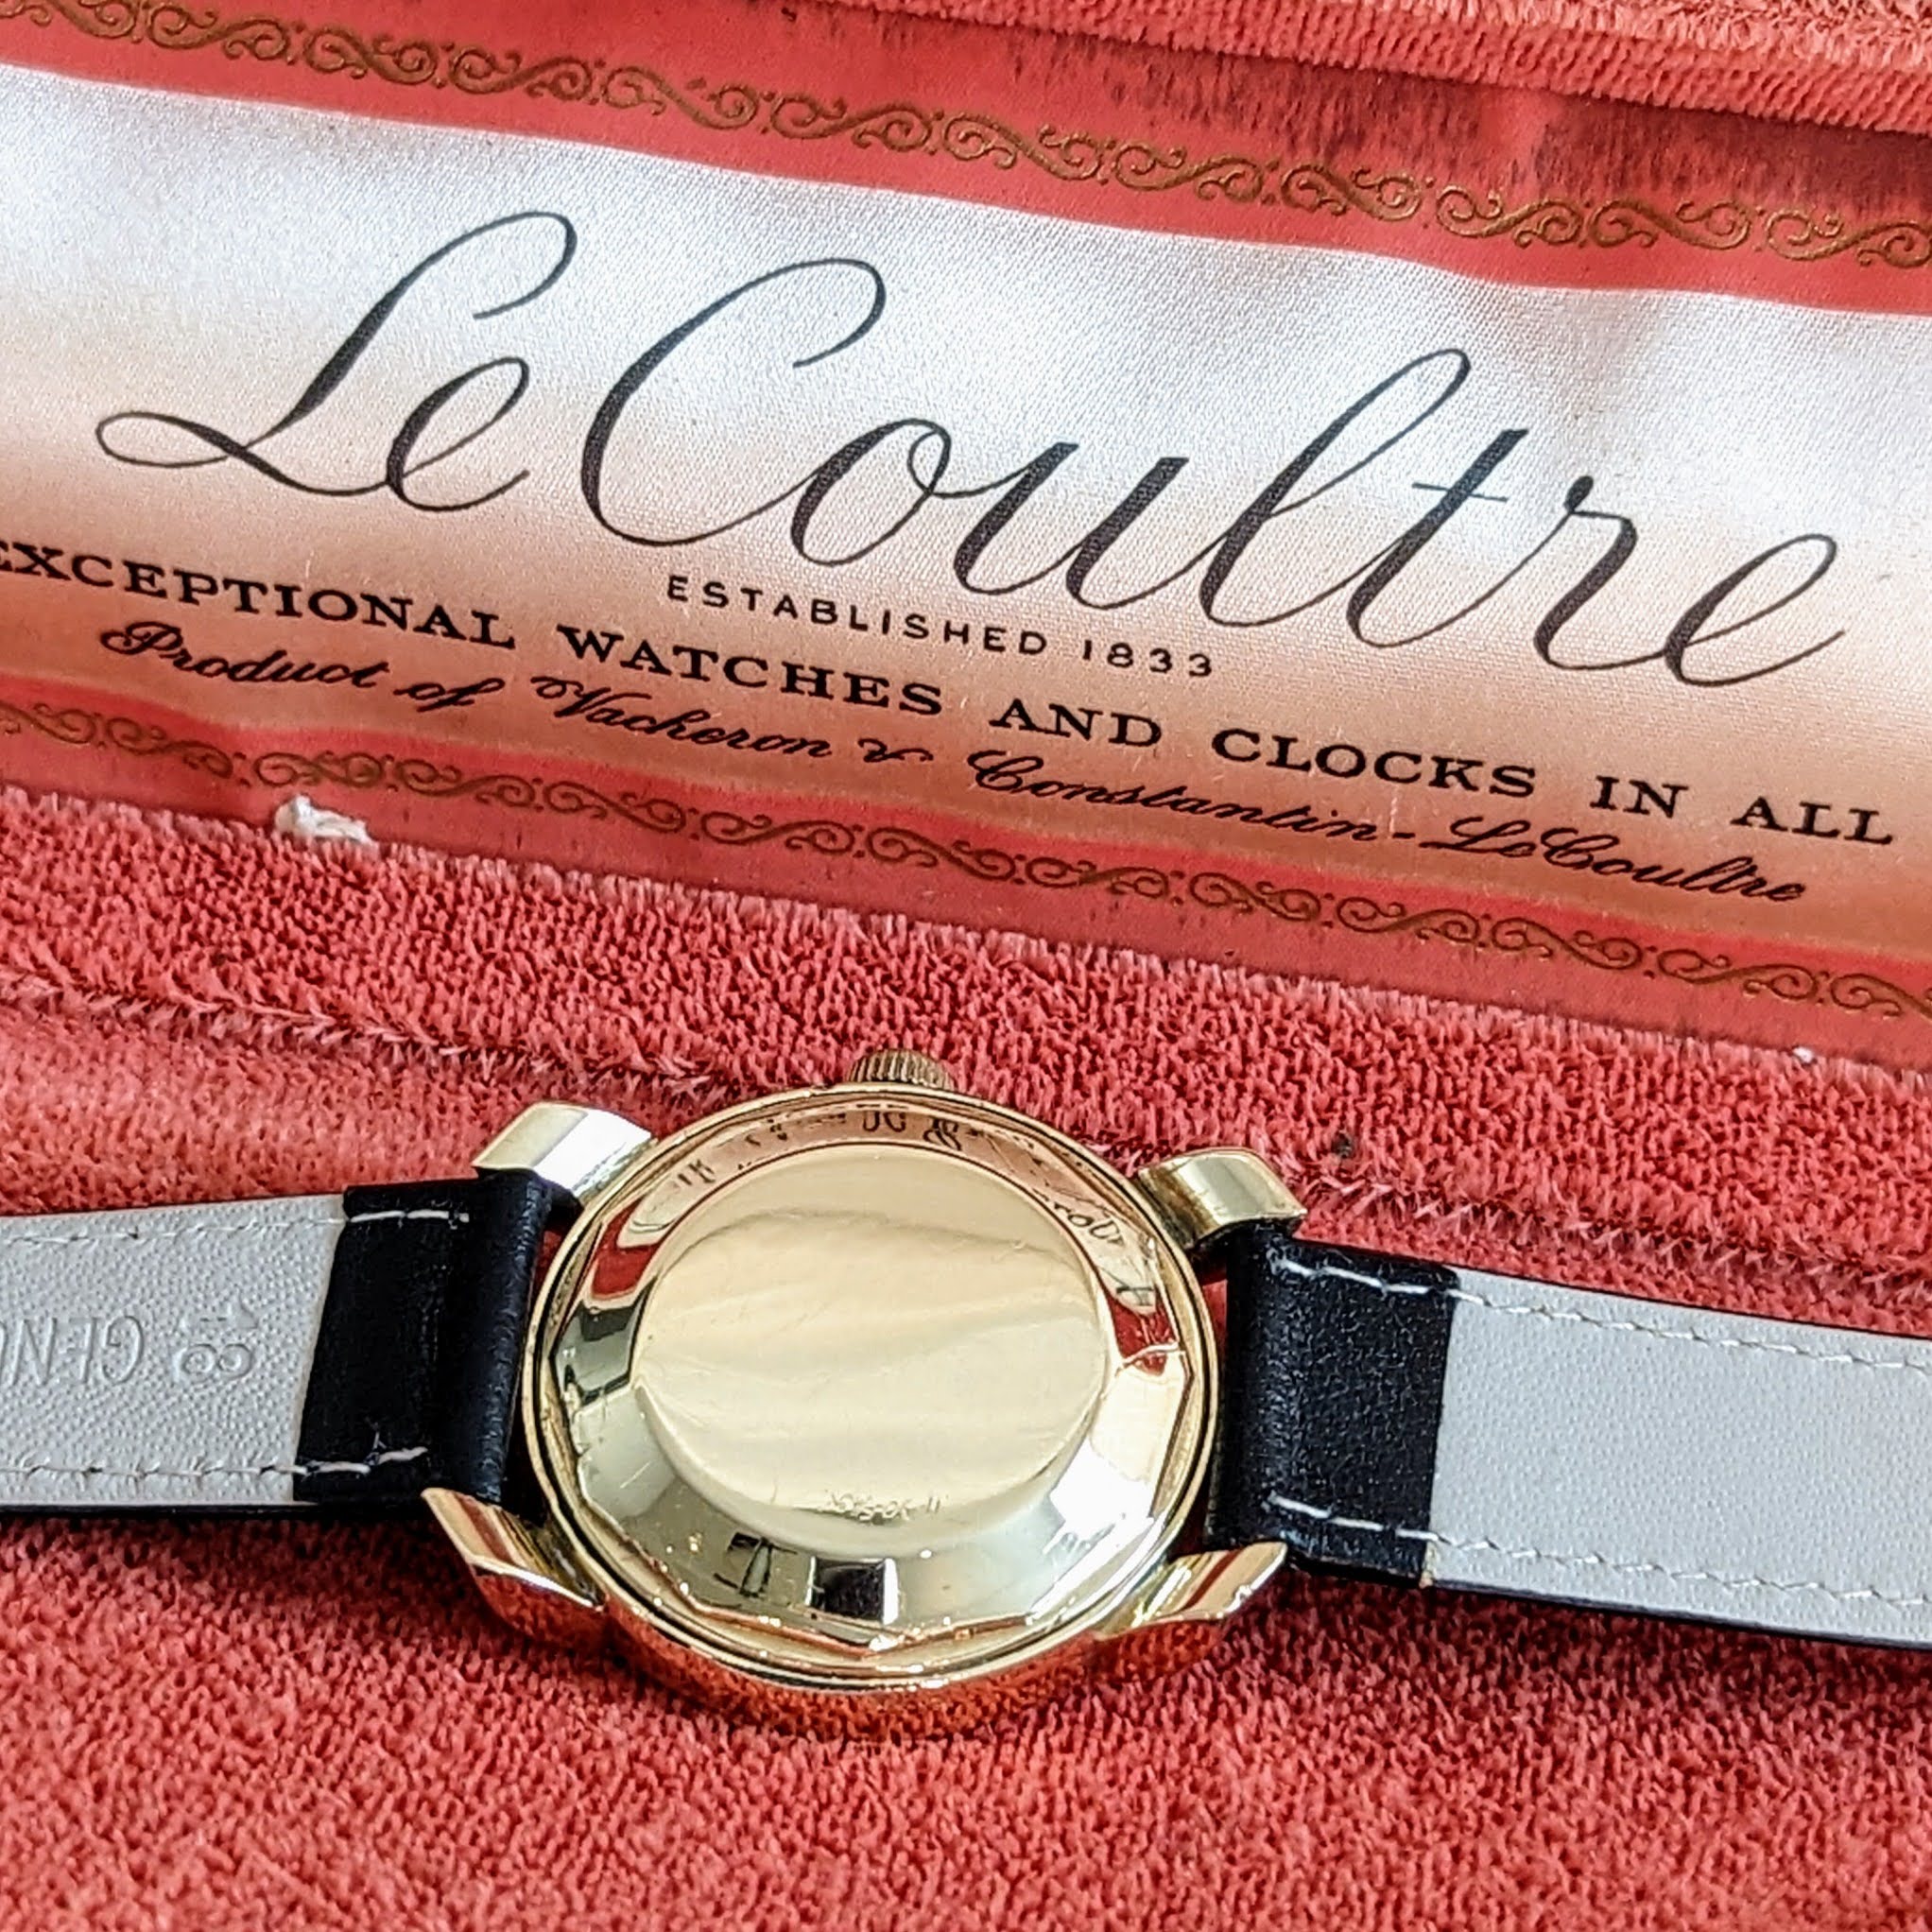 LeCoultre Bumper Automatic Watch Power-Reserve Indicator Wristwatch - In BOX!